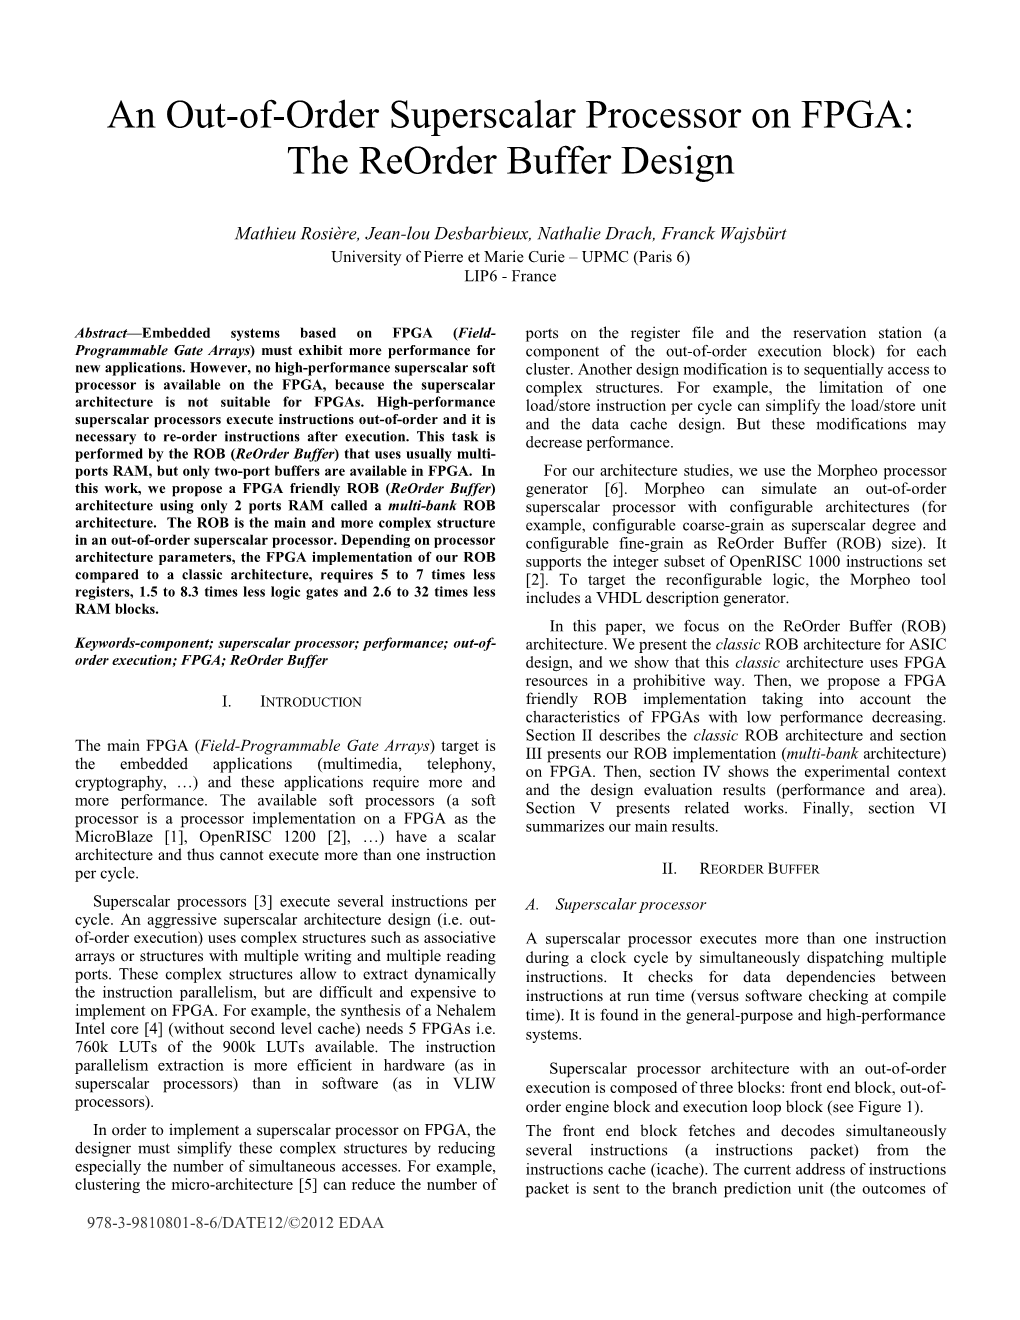 An Out-Of-Order Superscalar Processor on FPGA: the Reorder Buffer Design